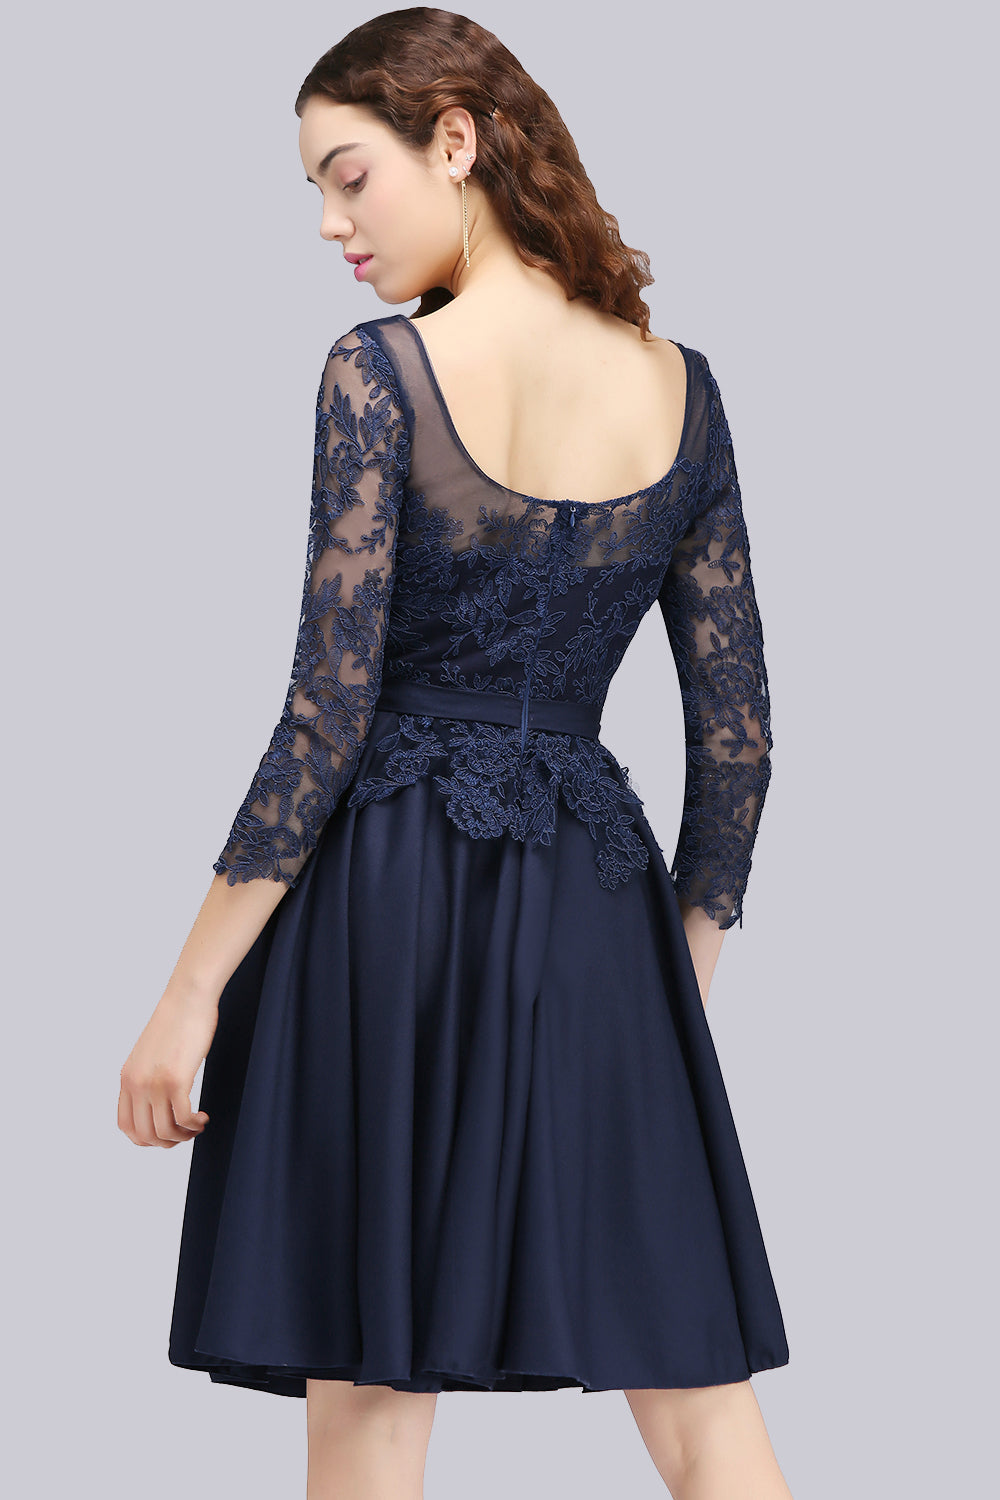 Load image into Gallery viewer, Modest 3/4 Sleeves Short Navy Lace Bridesmaid Dresses with Appliques-27dress
